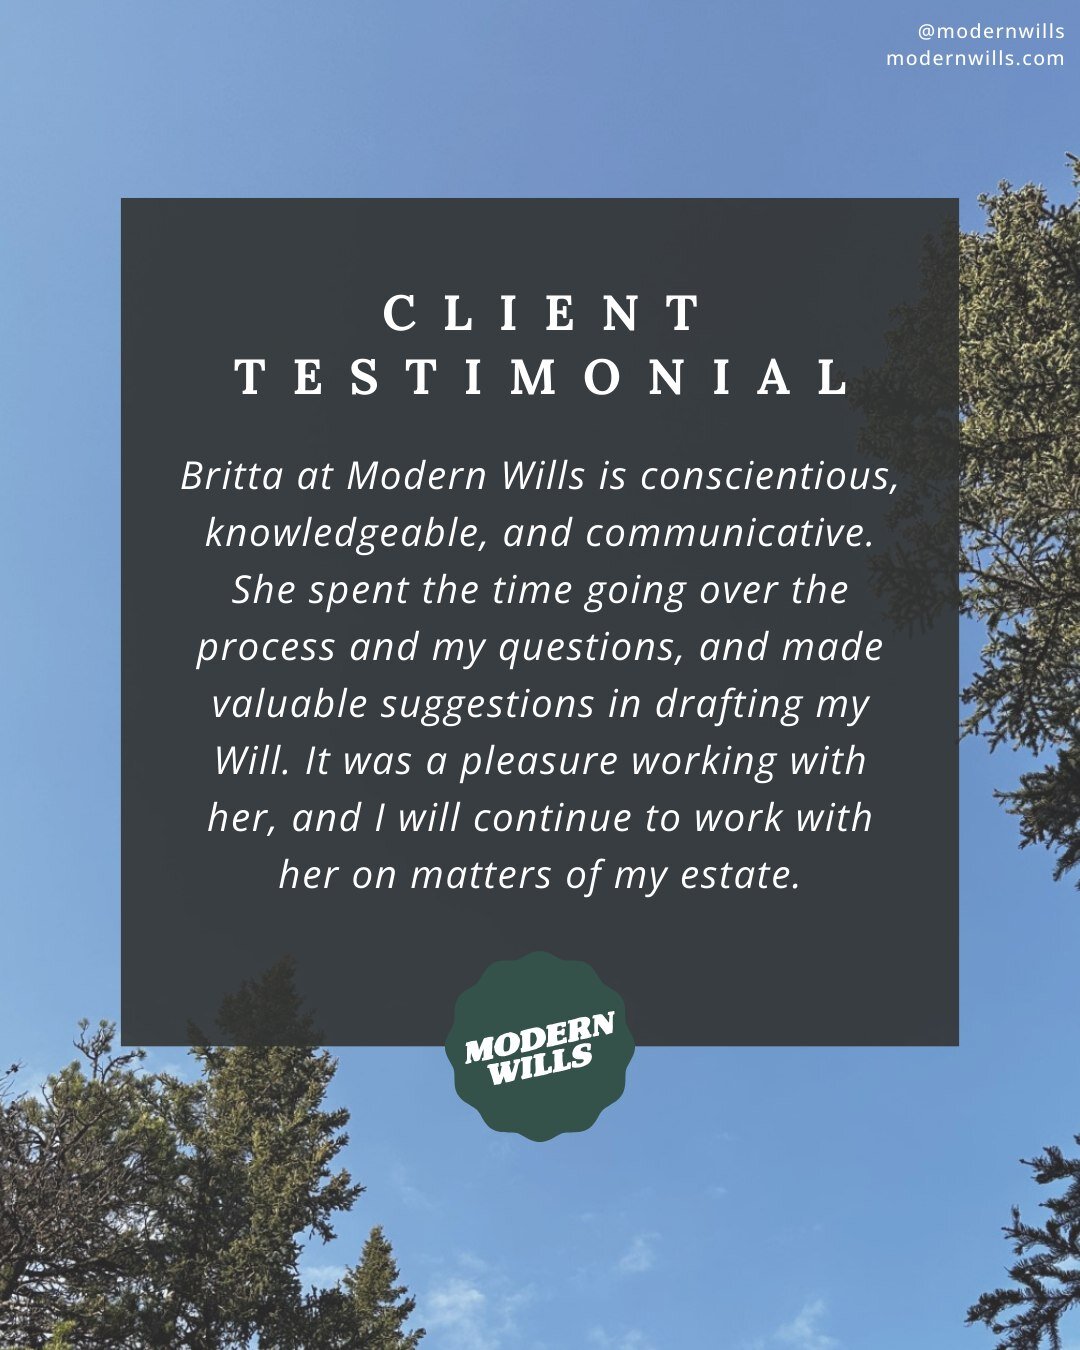 ✨ A huge thank you to our wonderful client for trusting us with their estate planning! We are in the business of providing peace of mind. That is our goal on every file! ✨

#ClientTestimonial #WillsAndTrusts #EstatePlanning